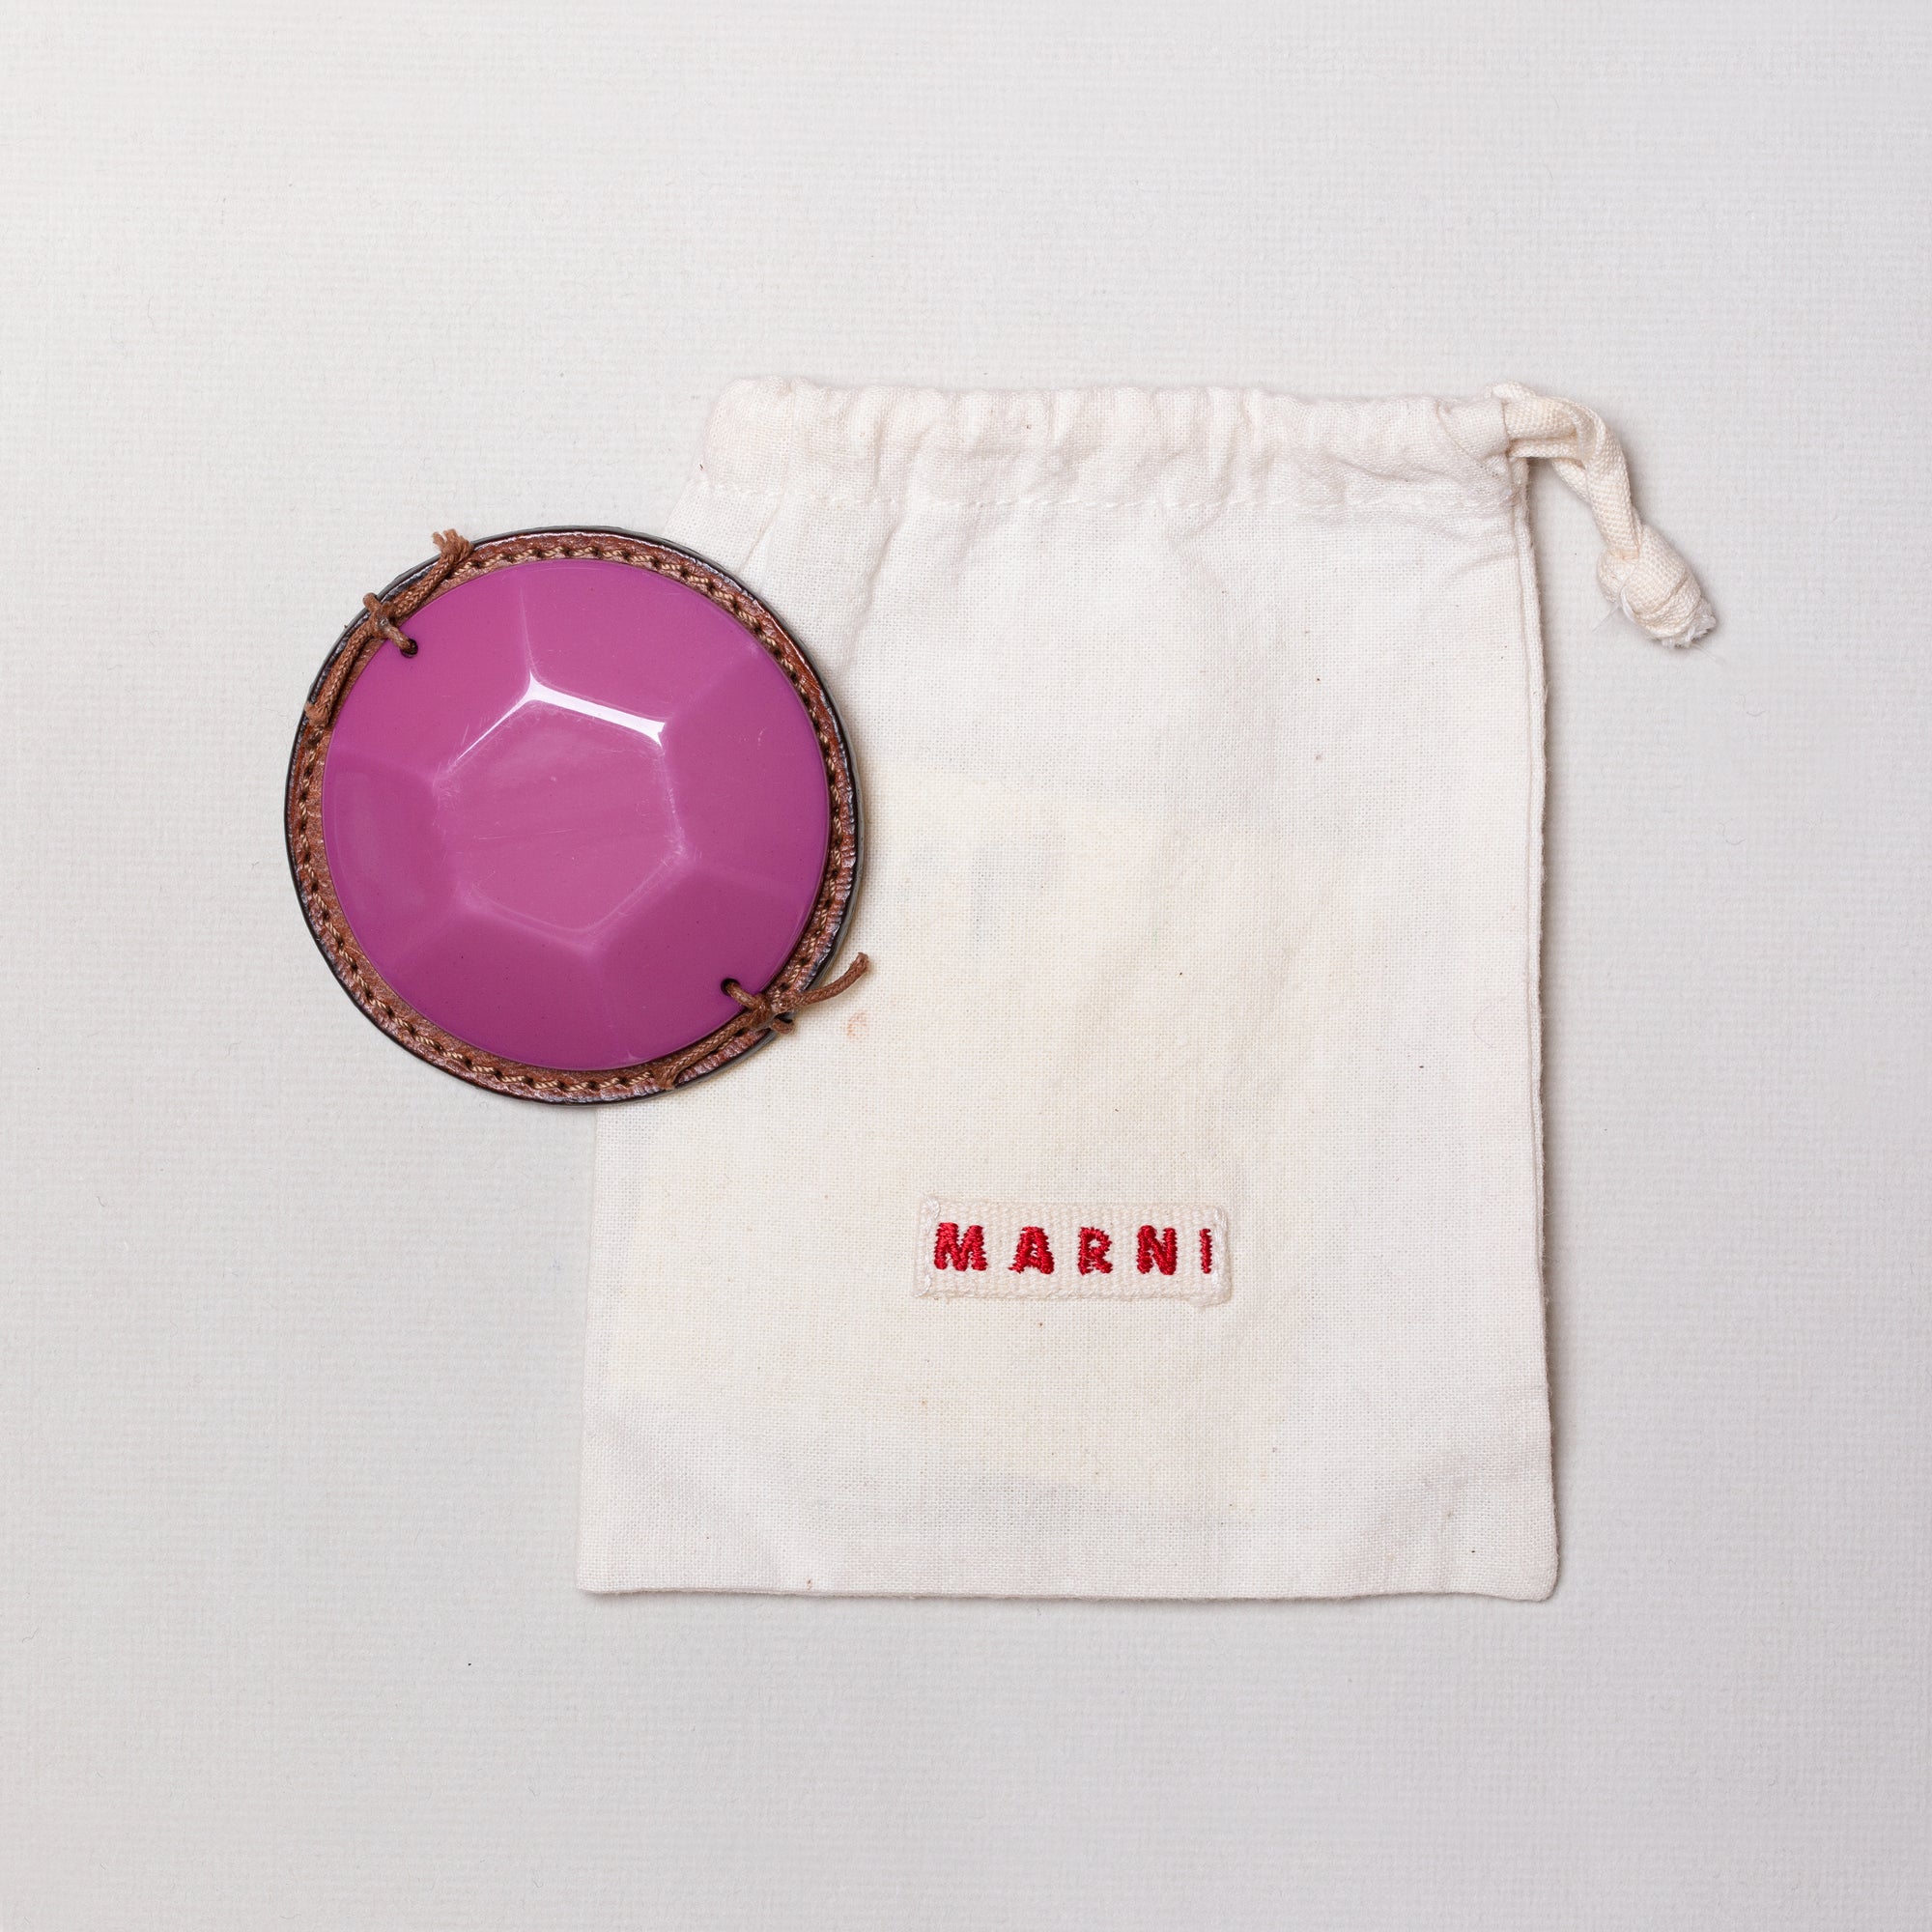 Vintage Marni Leather and Resin Brooch